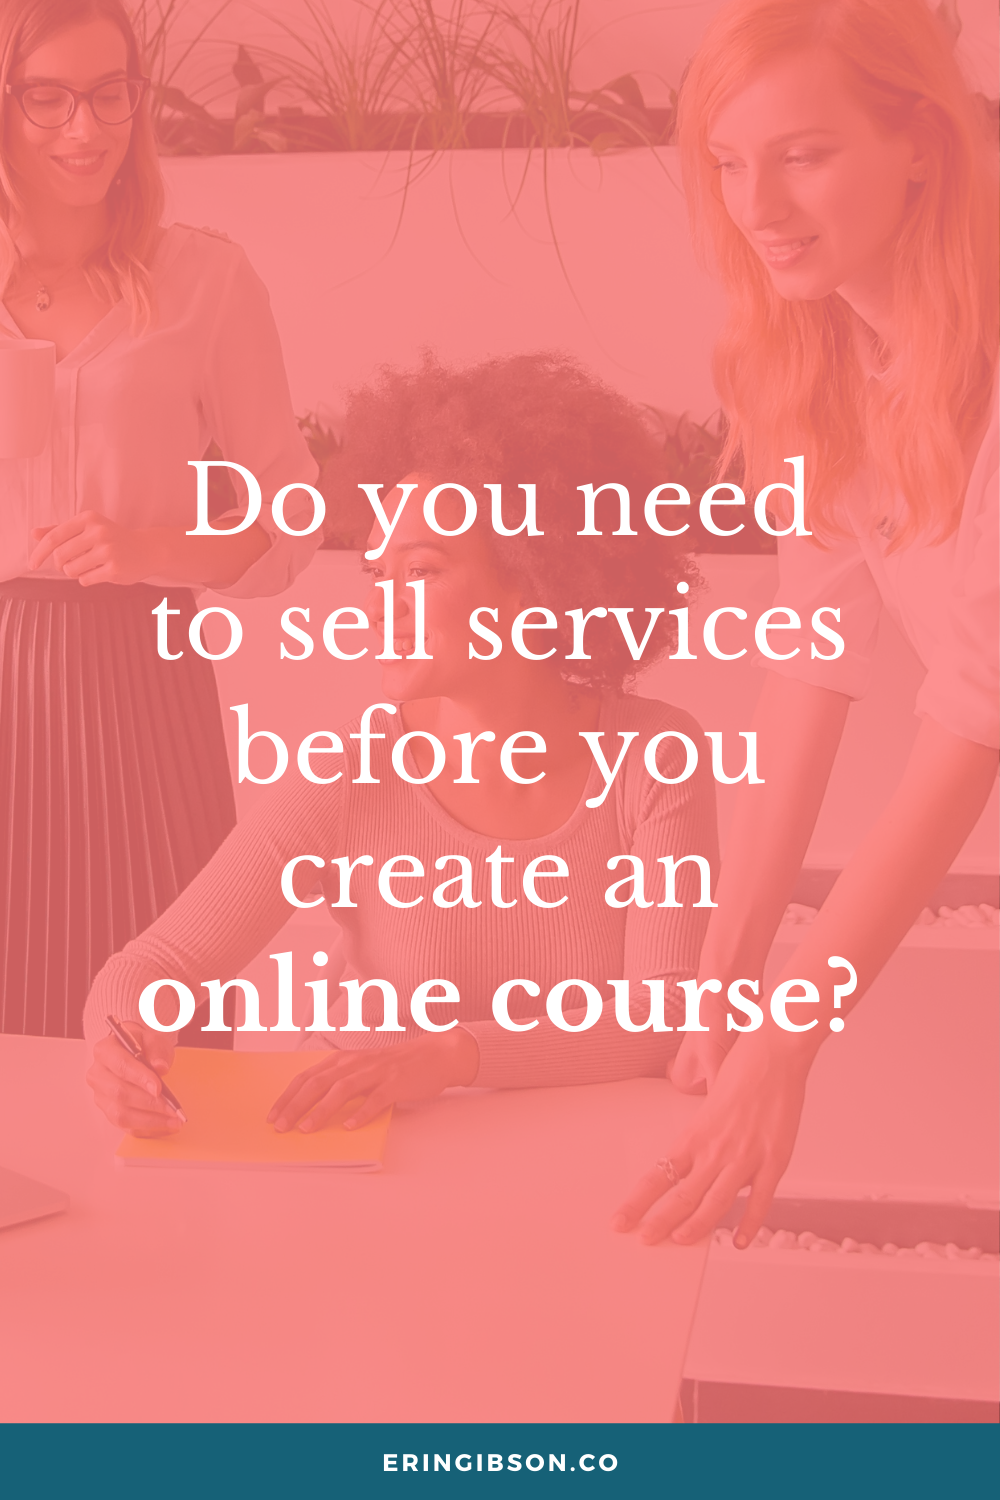 Do you need to sell services before launching an online course?